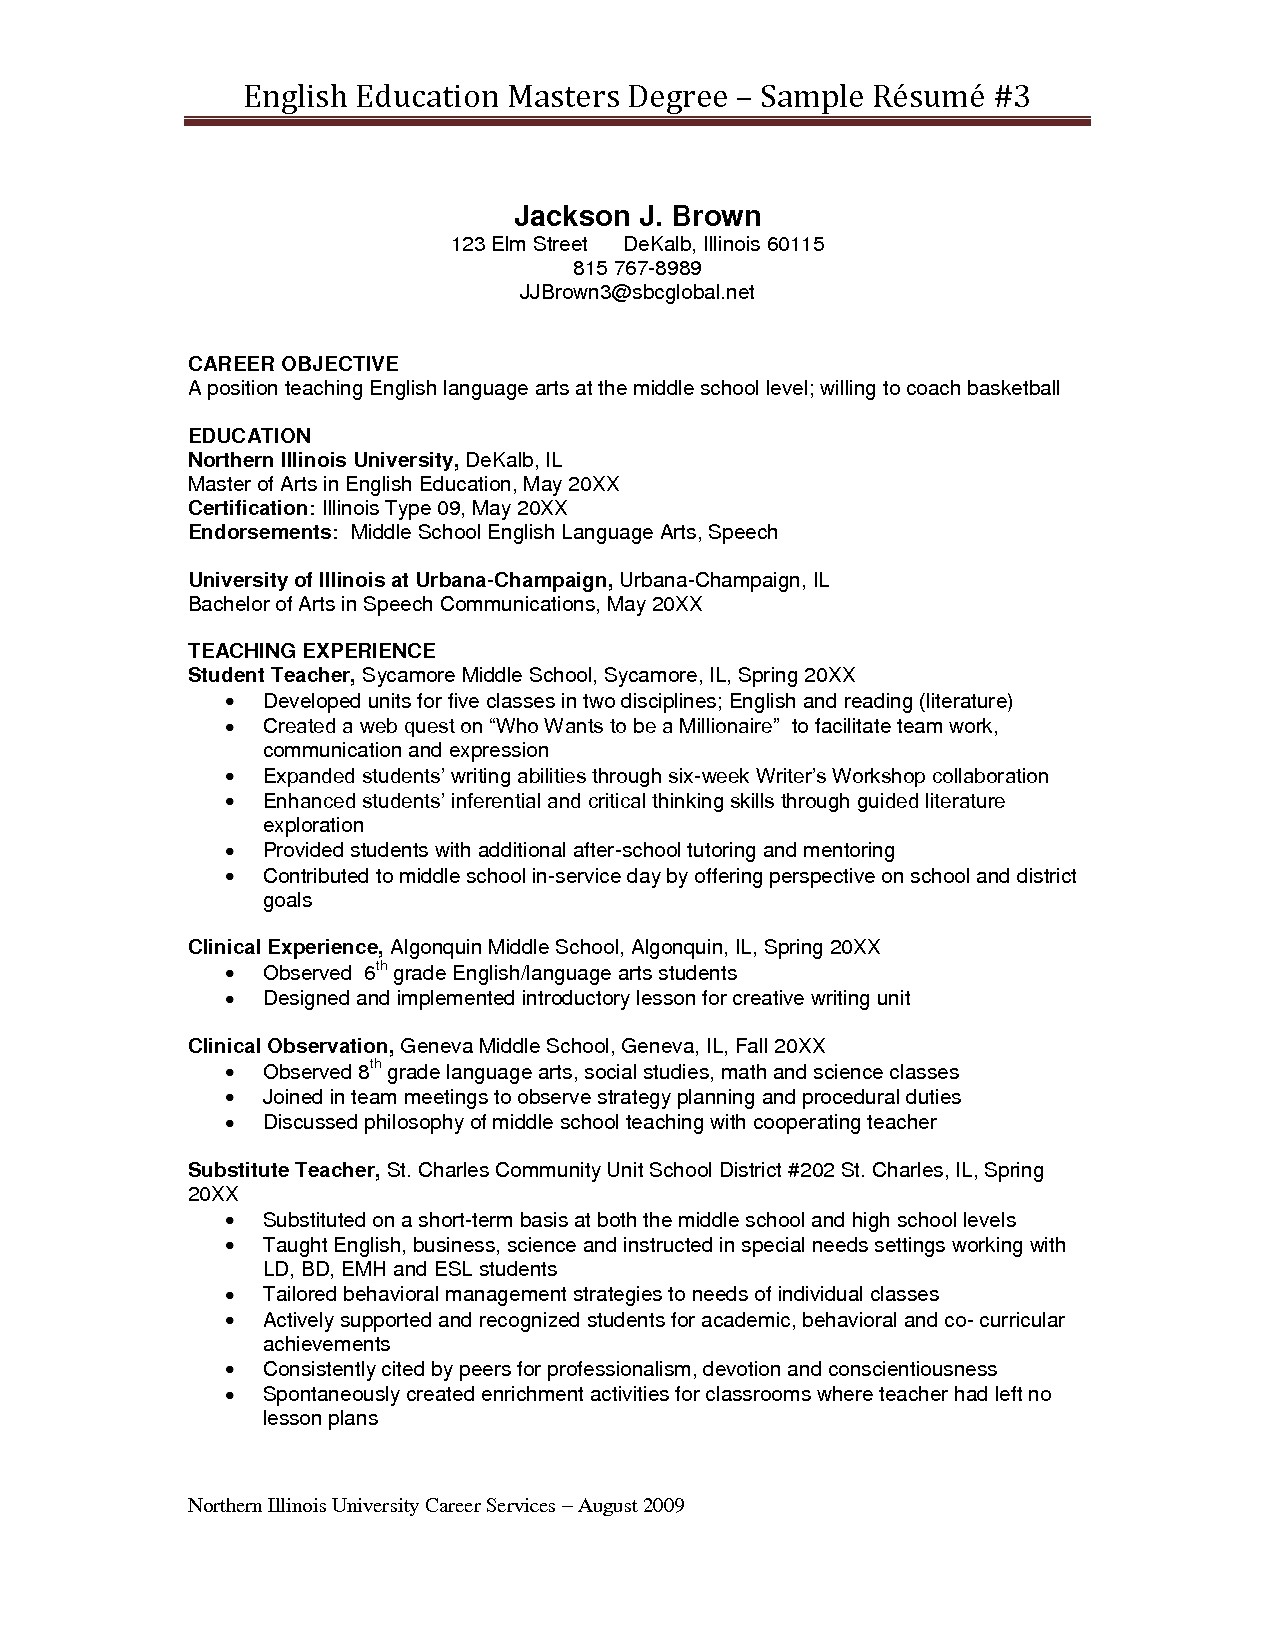 resume format for phd candidate